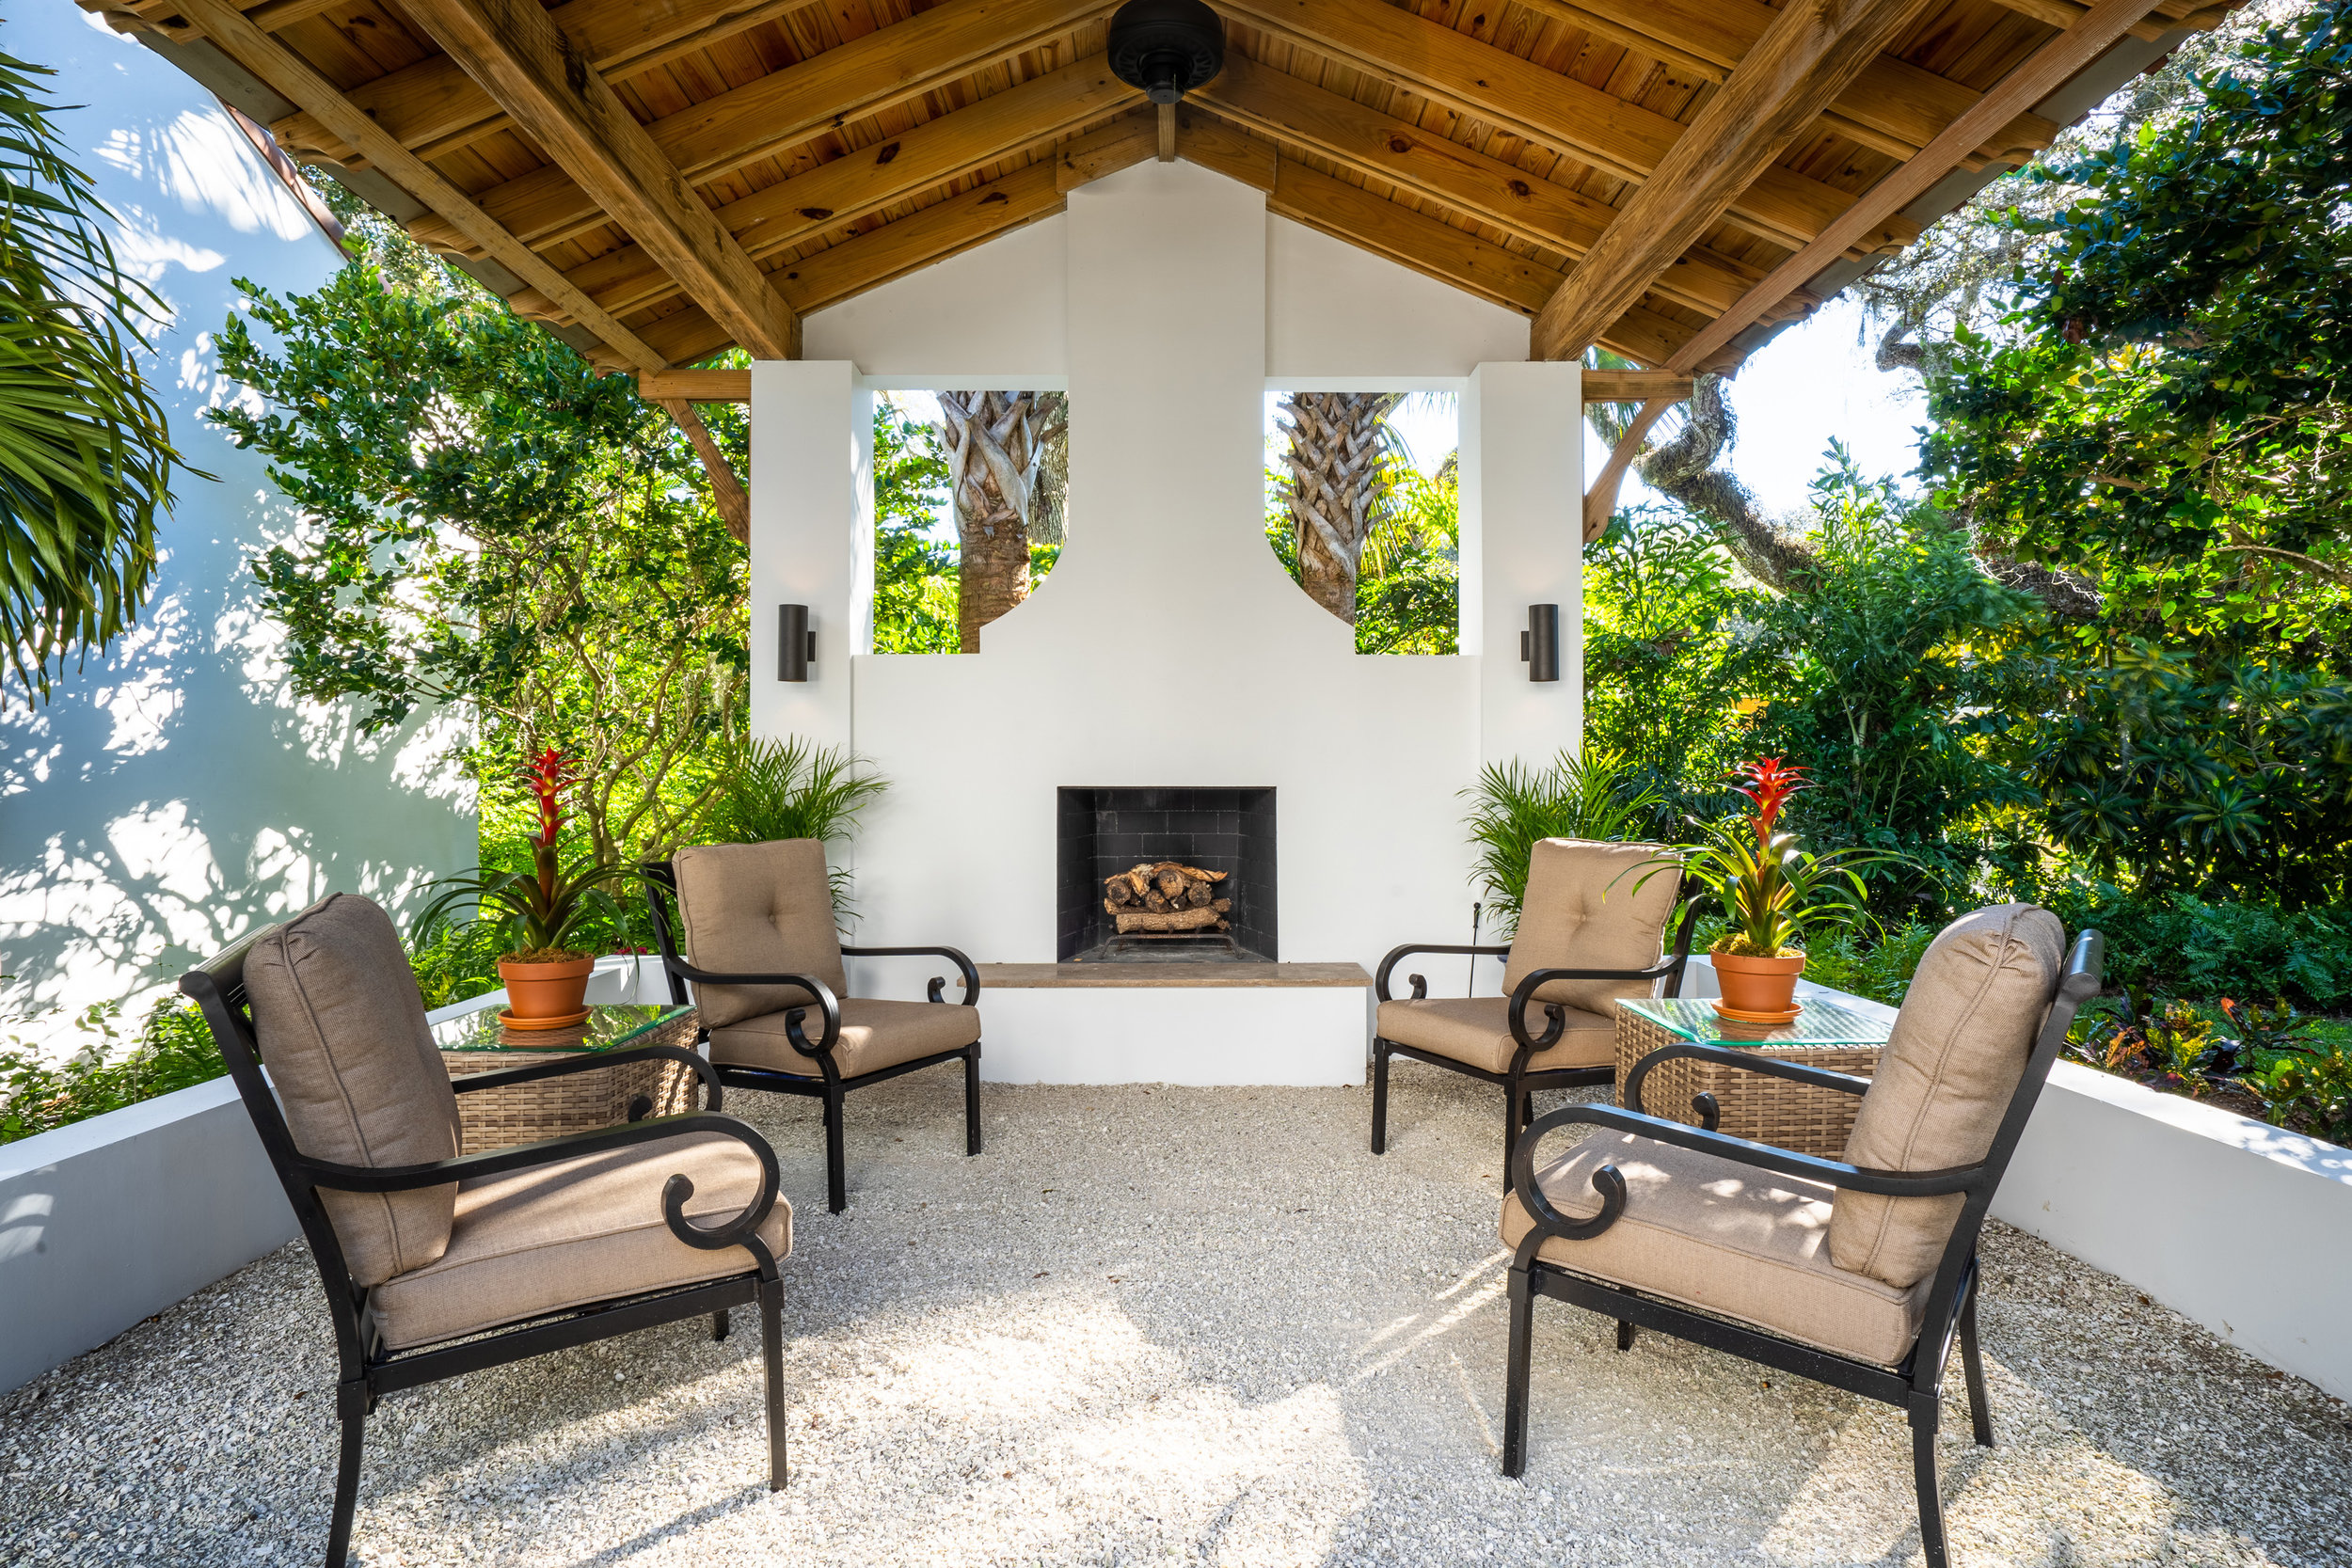 Covered outdoor gathering space has entertaining and dining space in front of a fireplace